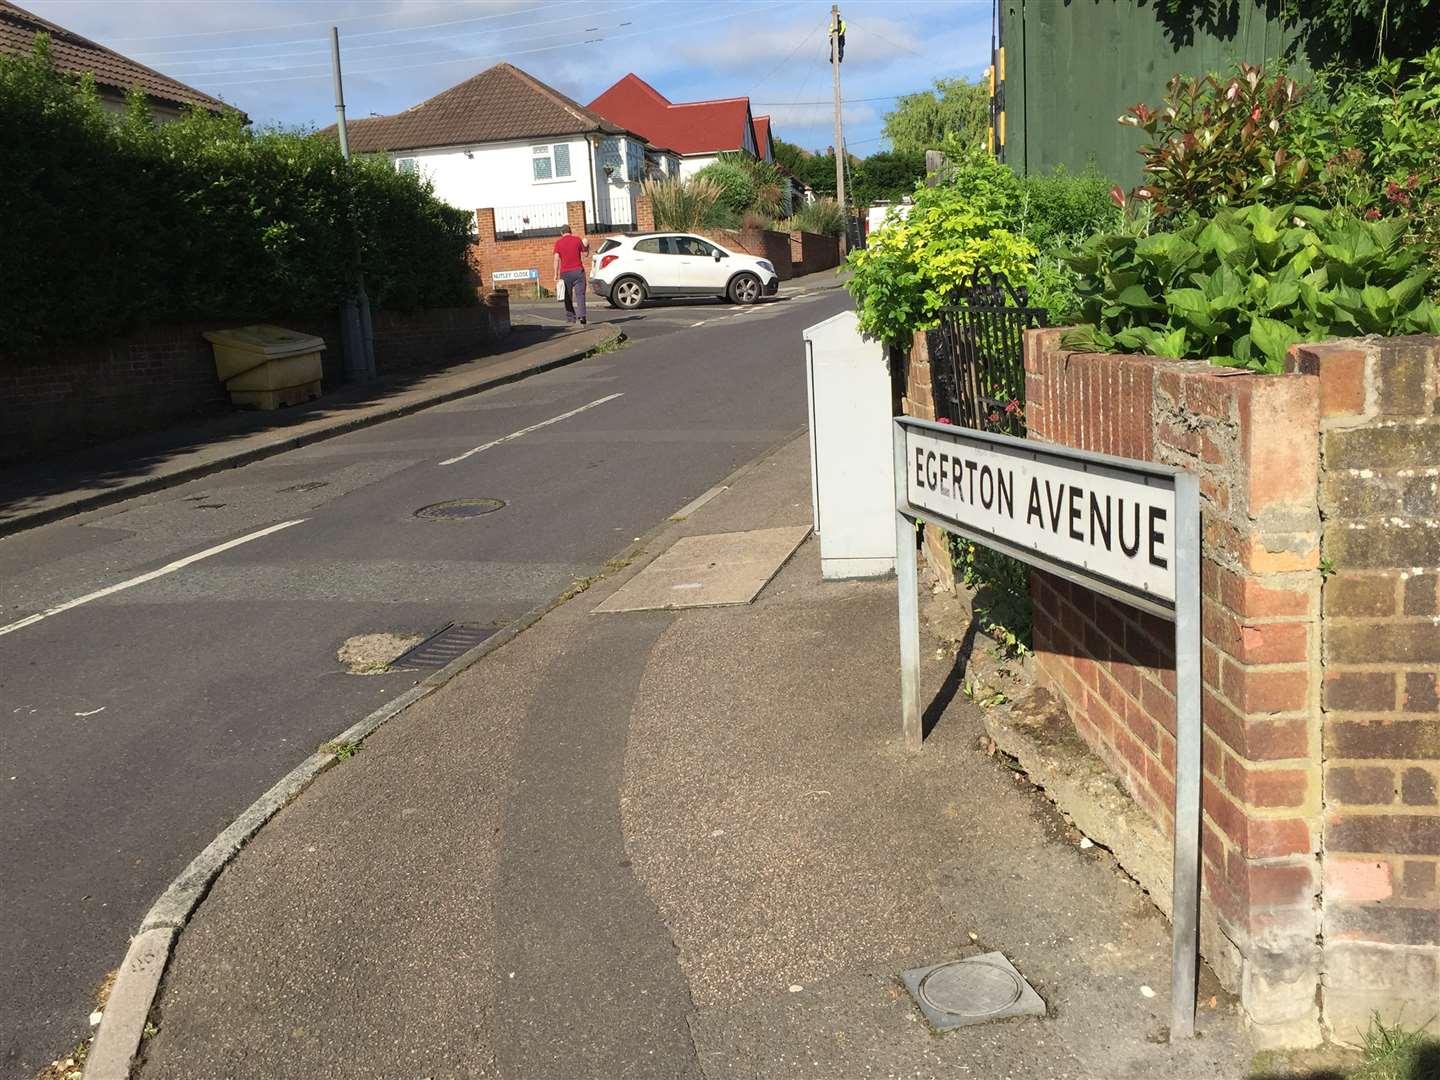 Residents of Egerton Avenue complained about parking problems